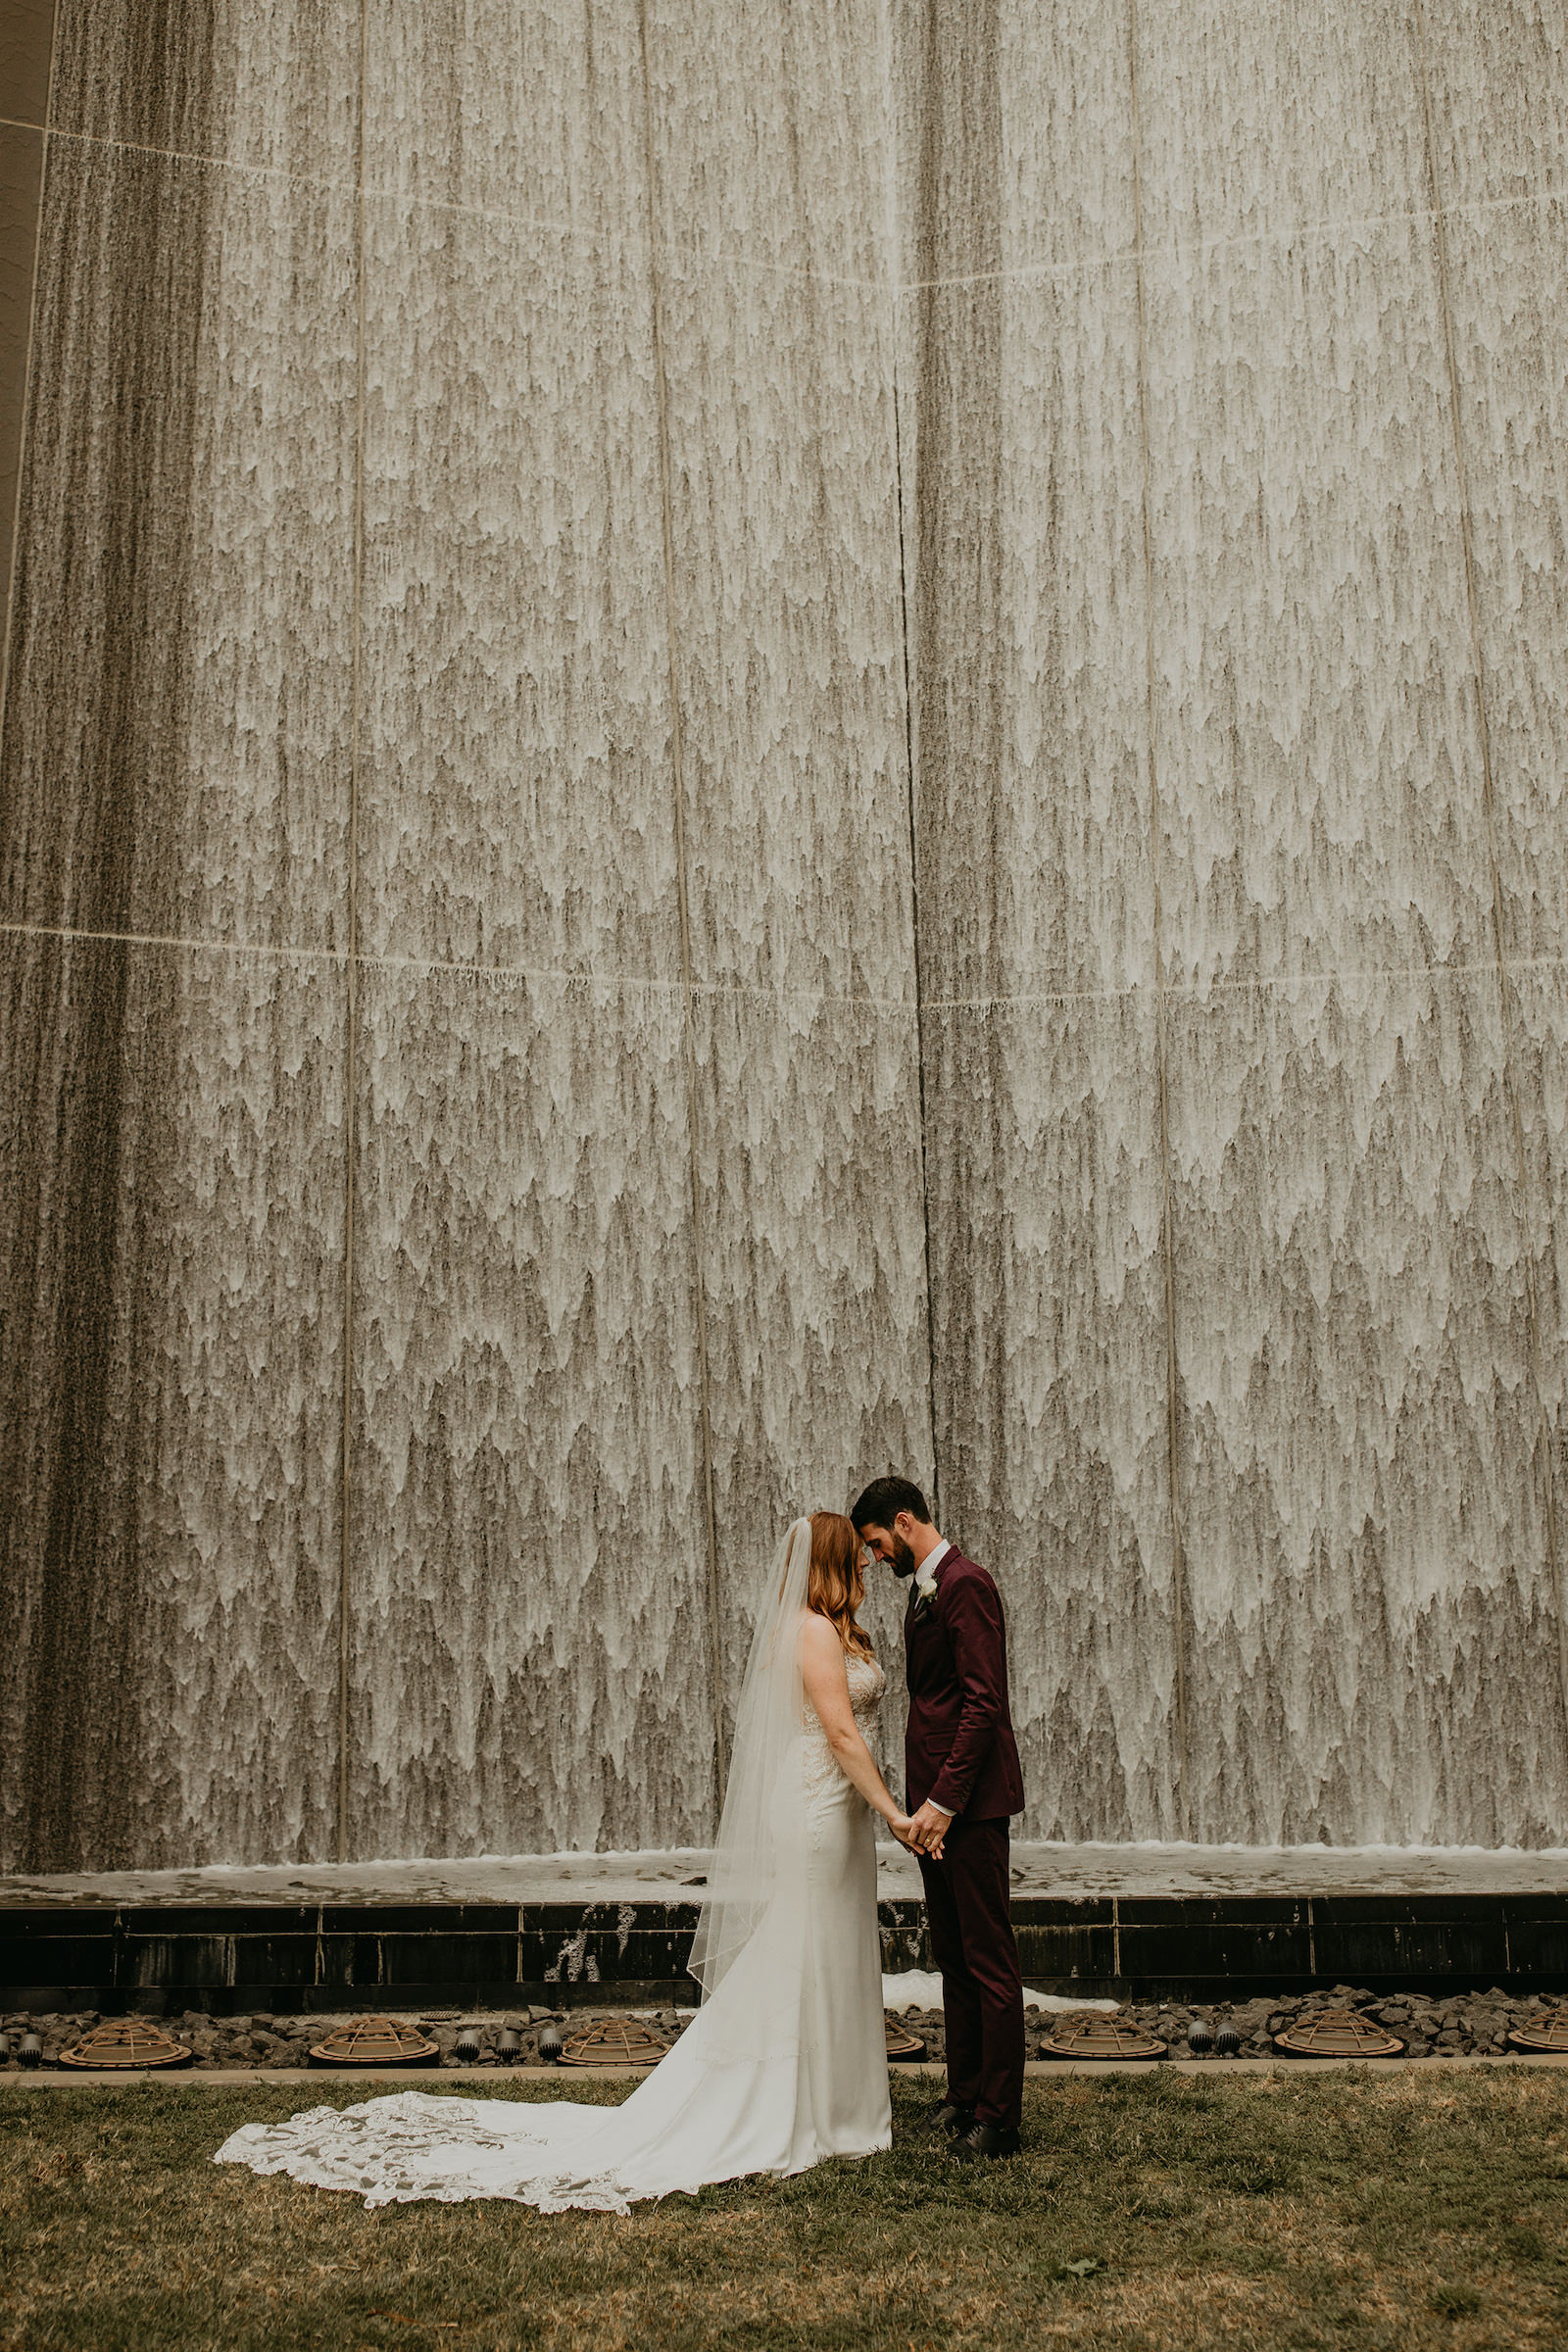 Downtown St. Pete City Wedding Portrait with Waterfall Fountain